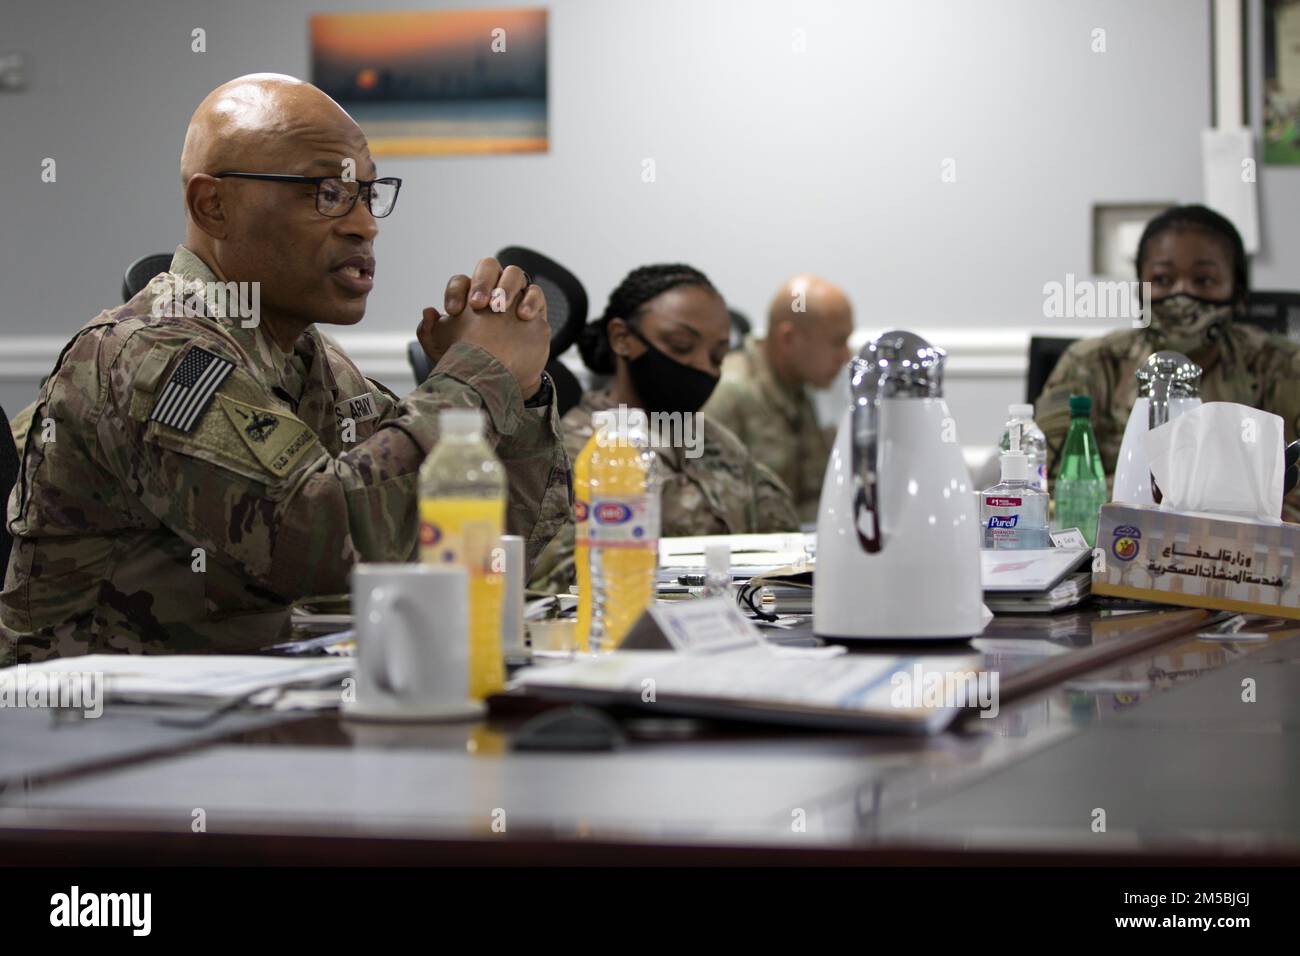 Maj. Gen. Michel M. Russell Sr., the commanding general of 1st Theater Sustainment Command, leads a conversation on suicide prevention during the second day of a commanders conference on Feb. 23, 2022, at Camp Arifjan, Kuwait. Russell hosted the conference to inspire unity and collaboration among the unit command teams responsible for carrying out the 1st TSC’s mission throughout the U.S. Central Command area of responsibility. Stock Photo